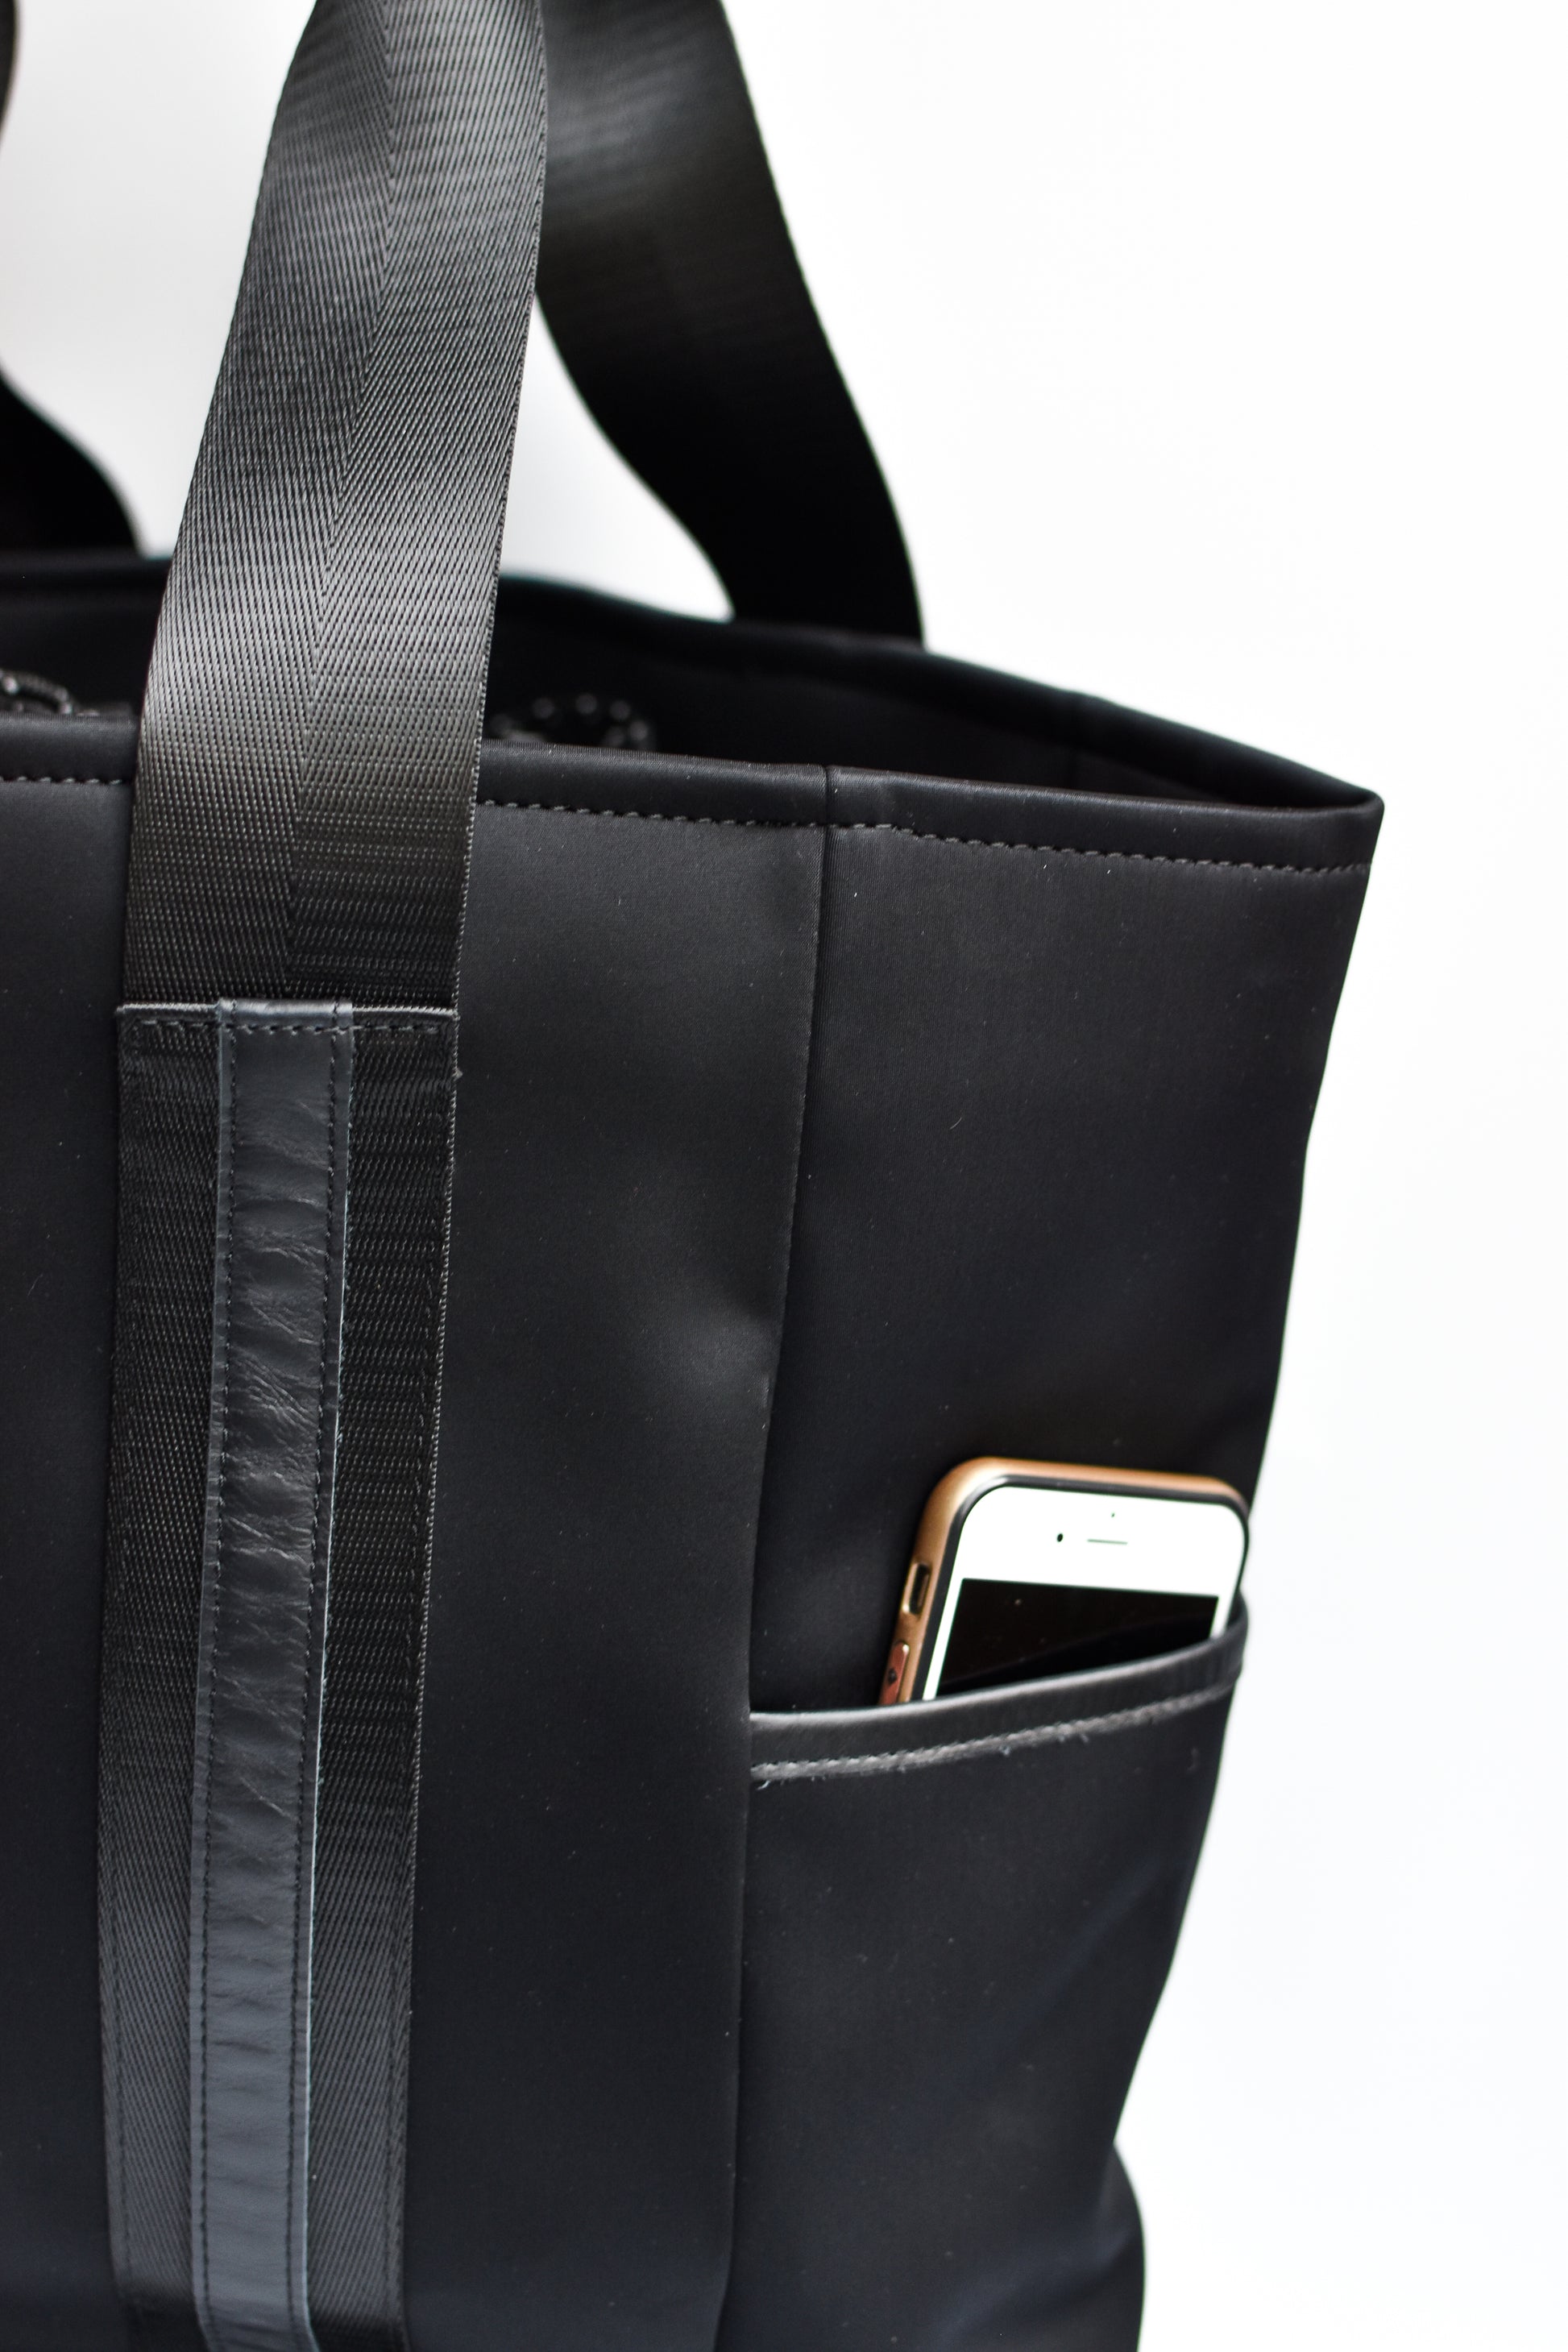 Close up of exterior pocket on black neoprene tote bag with high shine cinch top closure and leather details. 